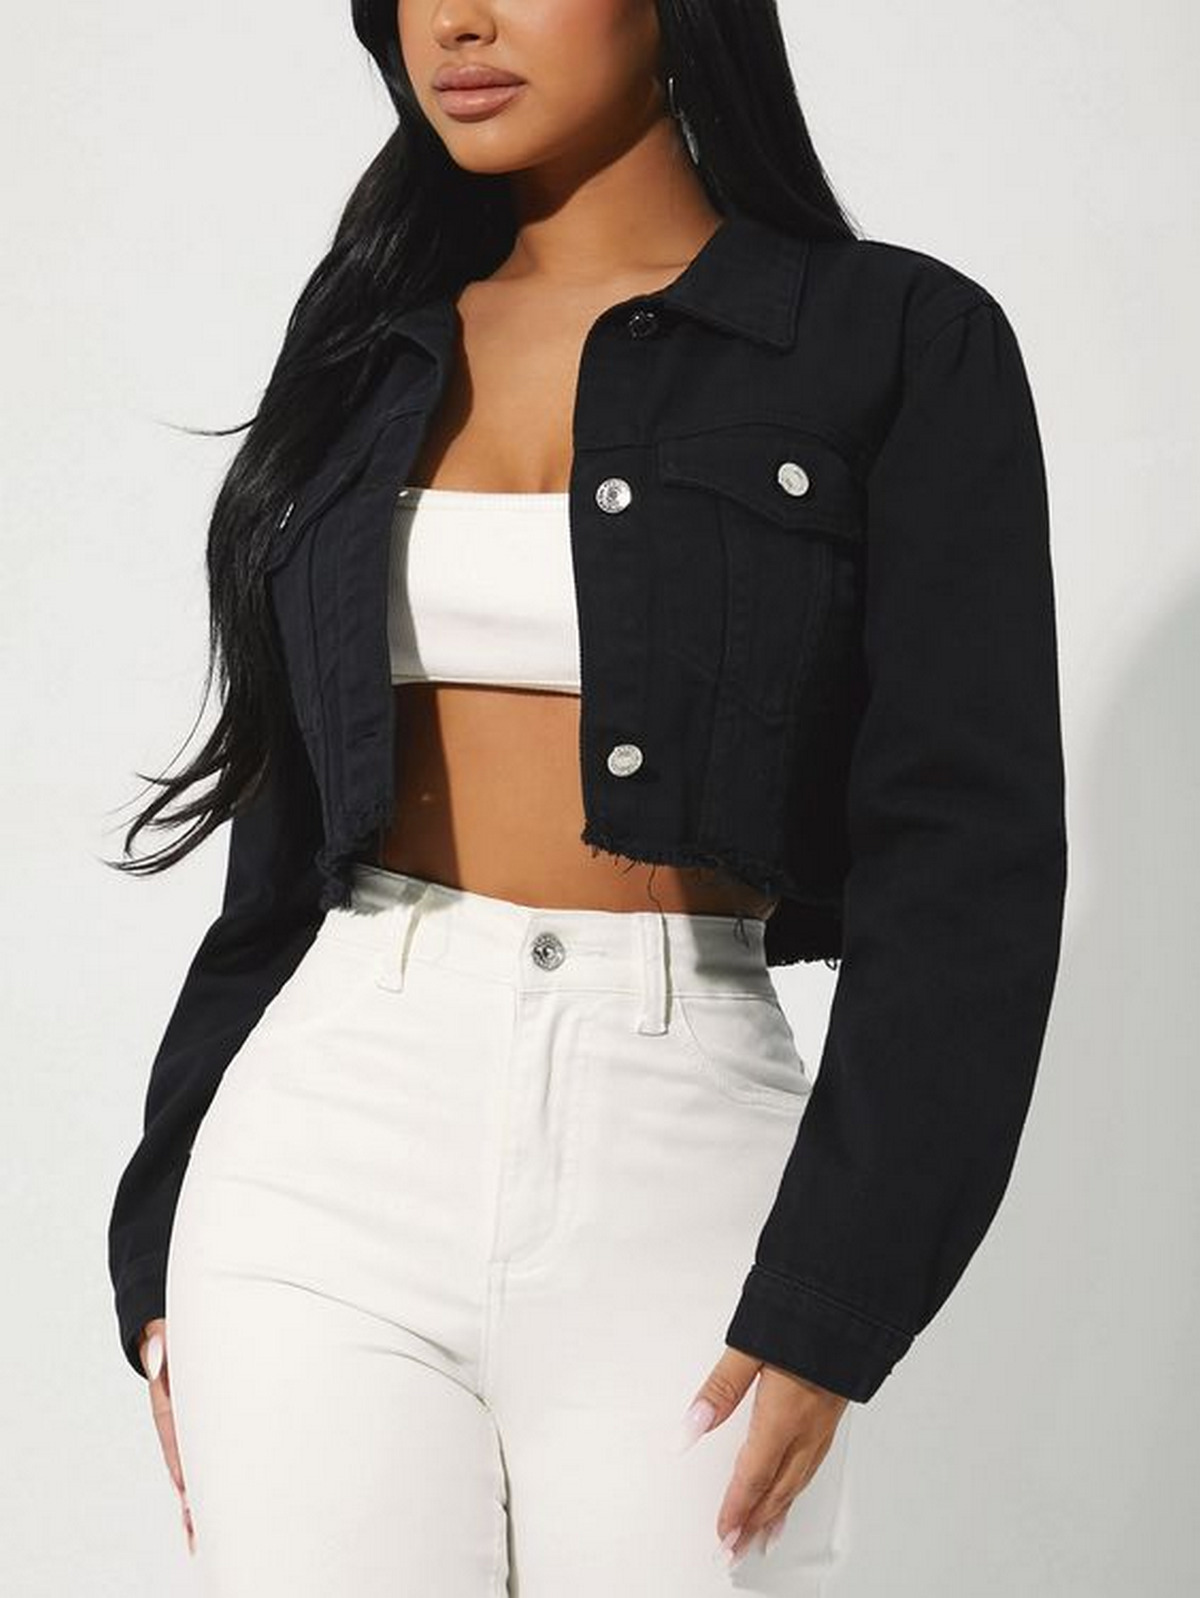 Black Denim Jacket With White Crop Top and White Jeans